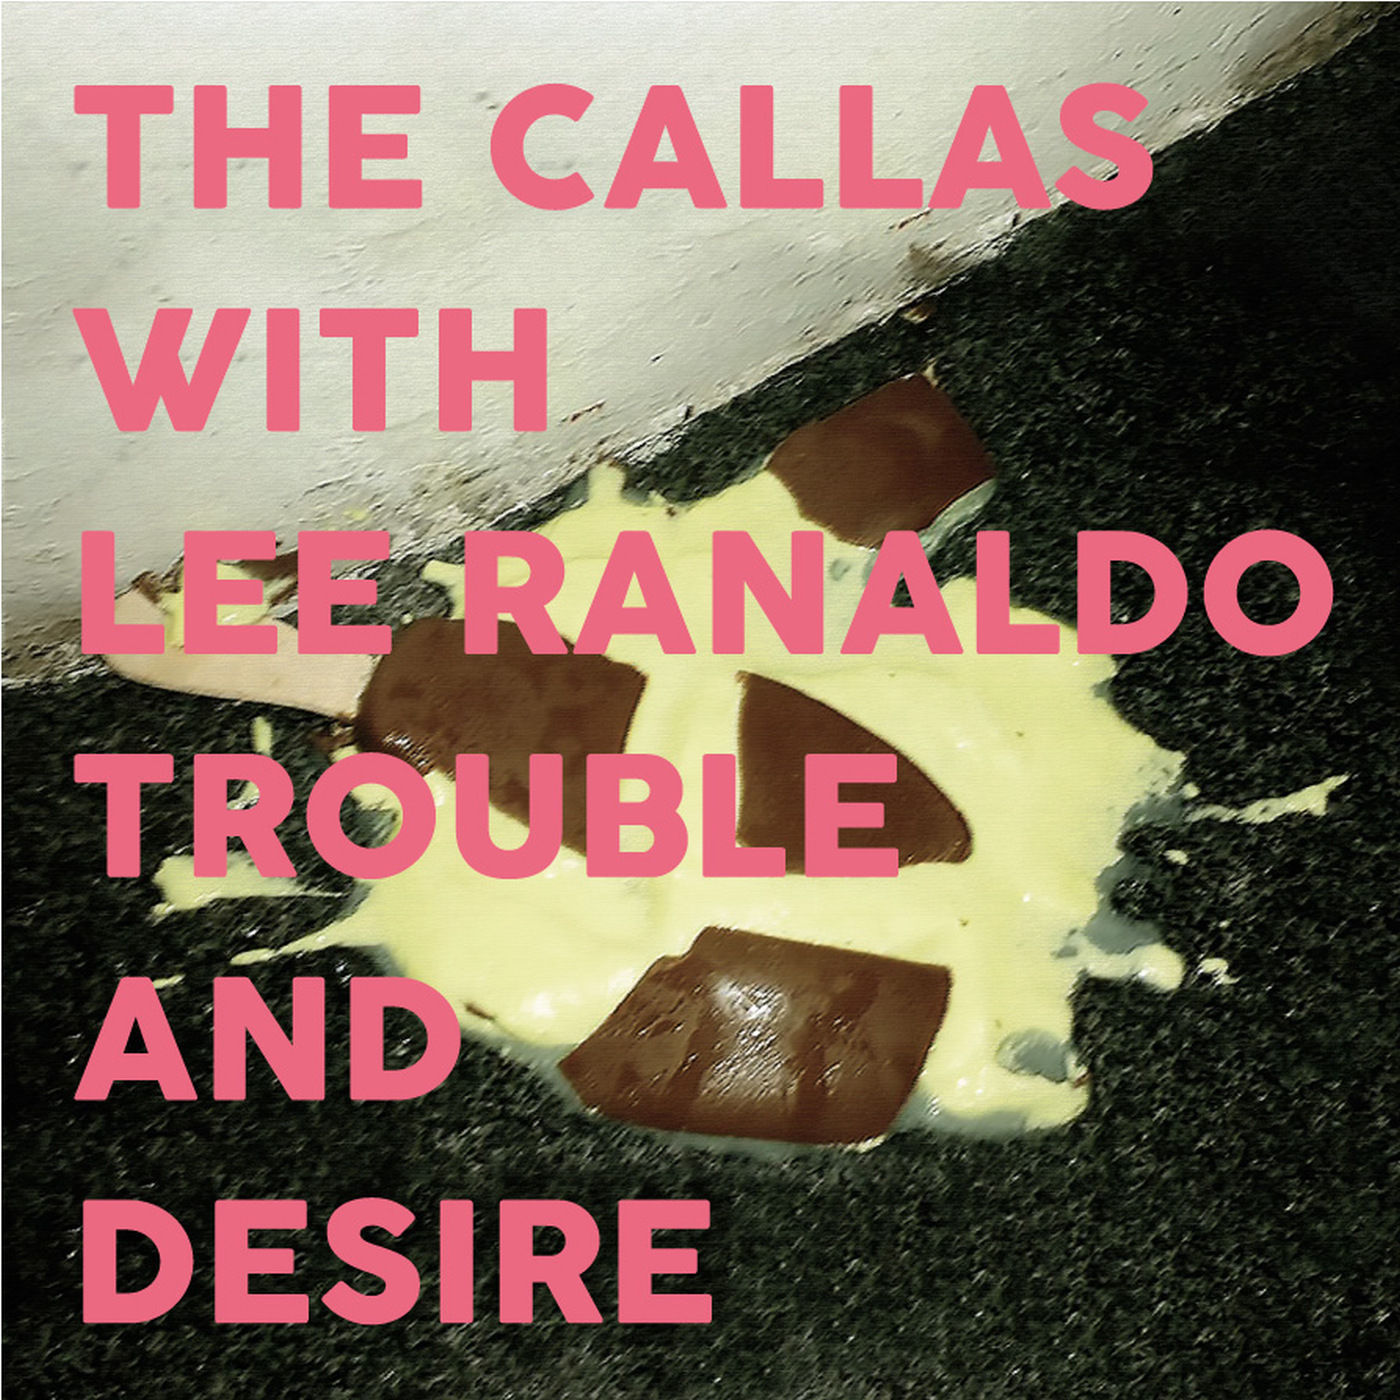 The Callas With Lee Ranaldo – Trouble and Desire (2018) [FLAC 24bit/48kHz]